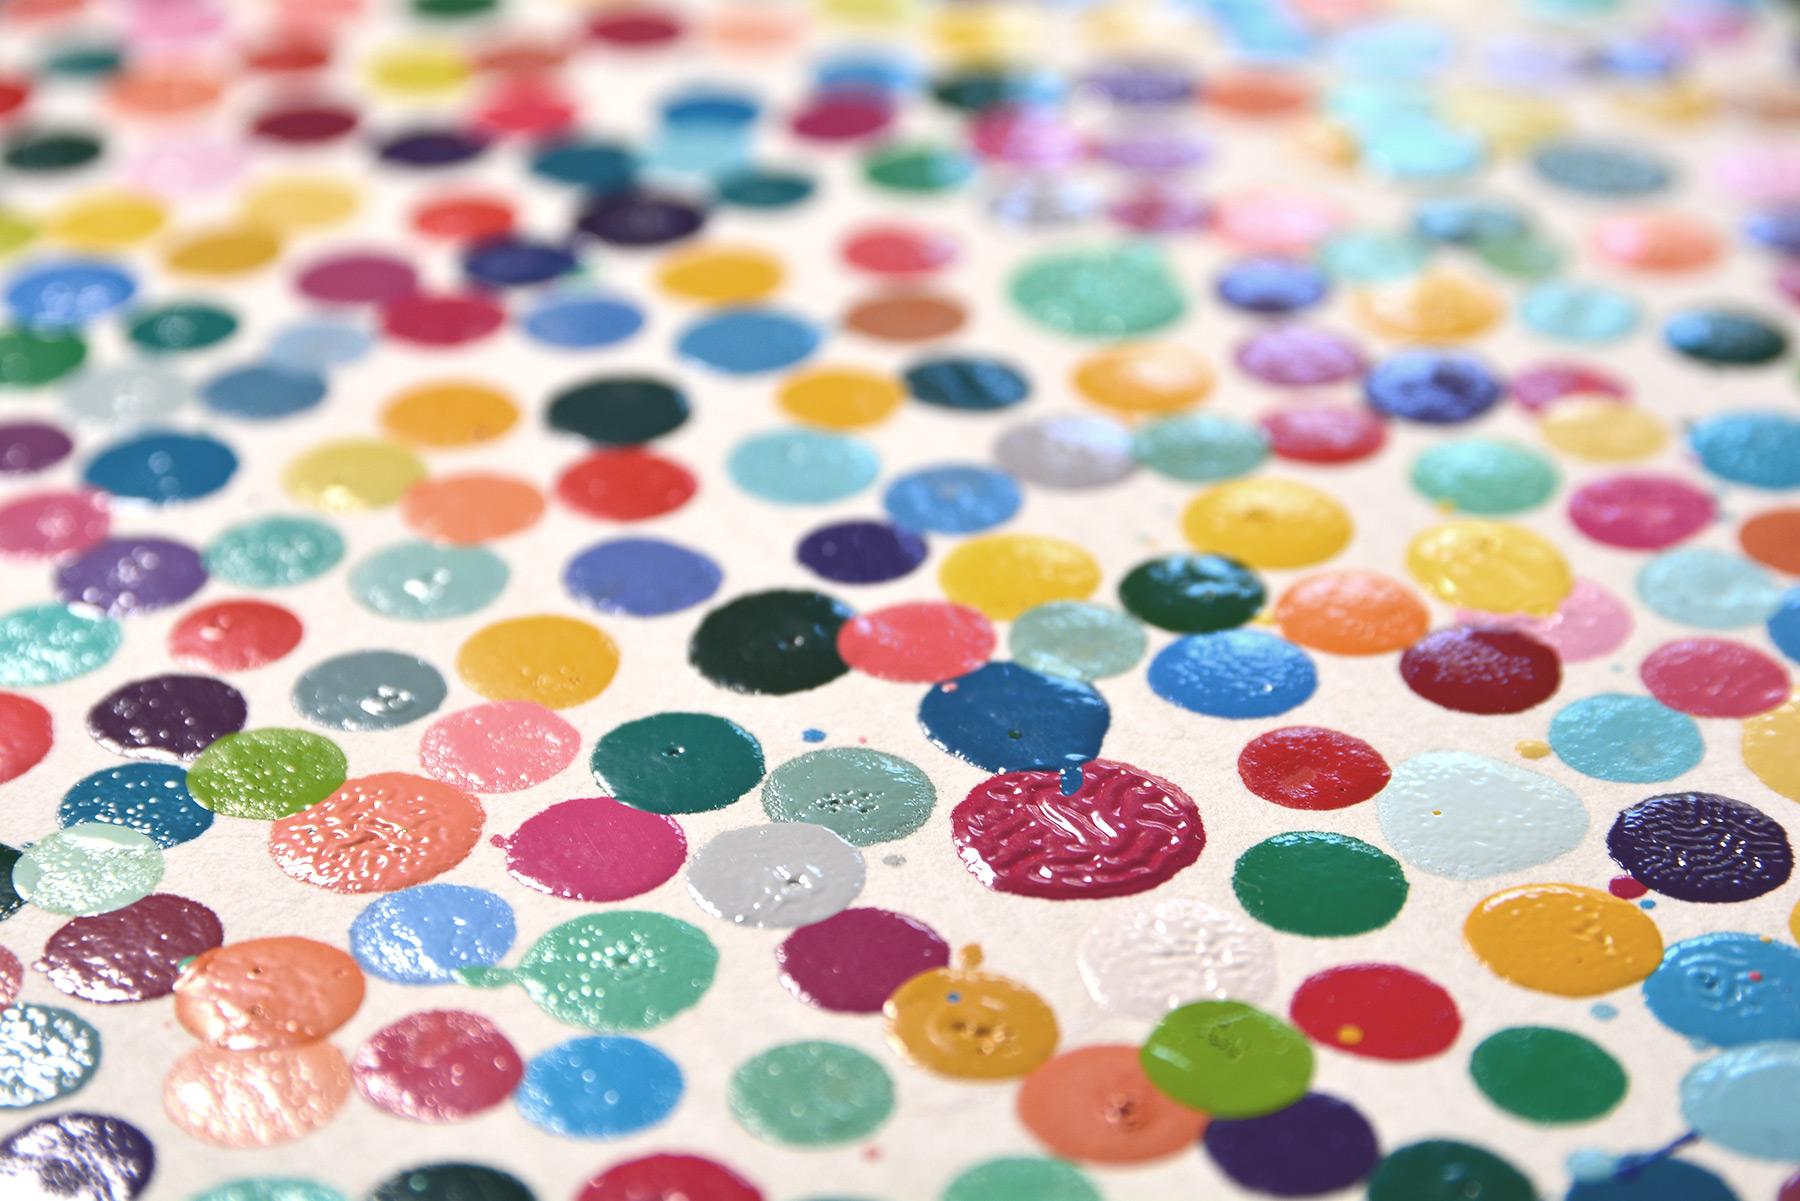 DAMIEN HIRST - THE CURRENCY. Original work The Currency Project. Dots. Colors 1